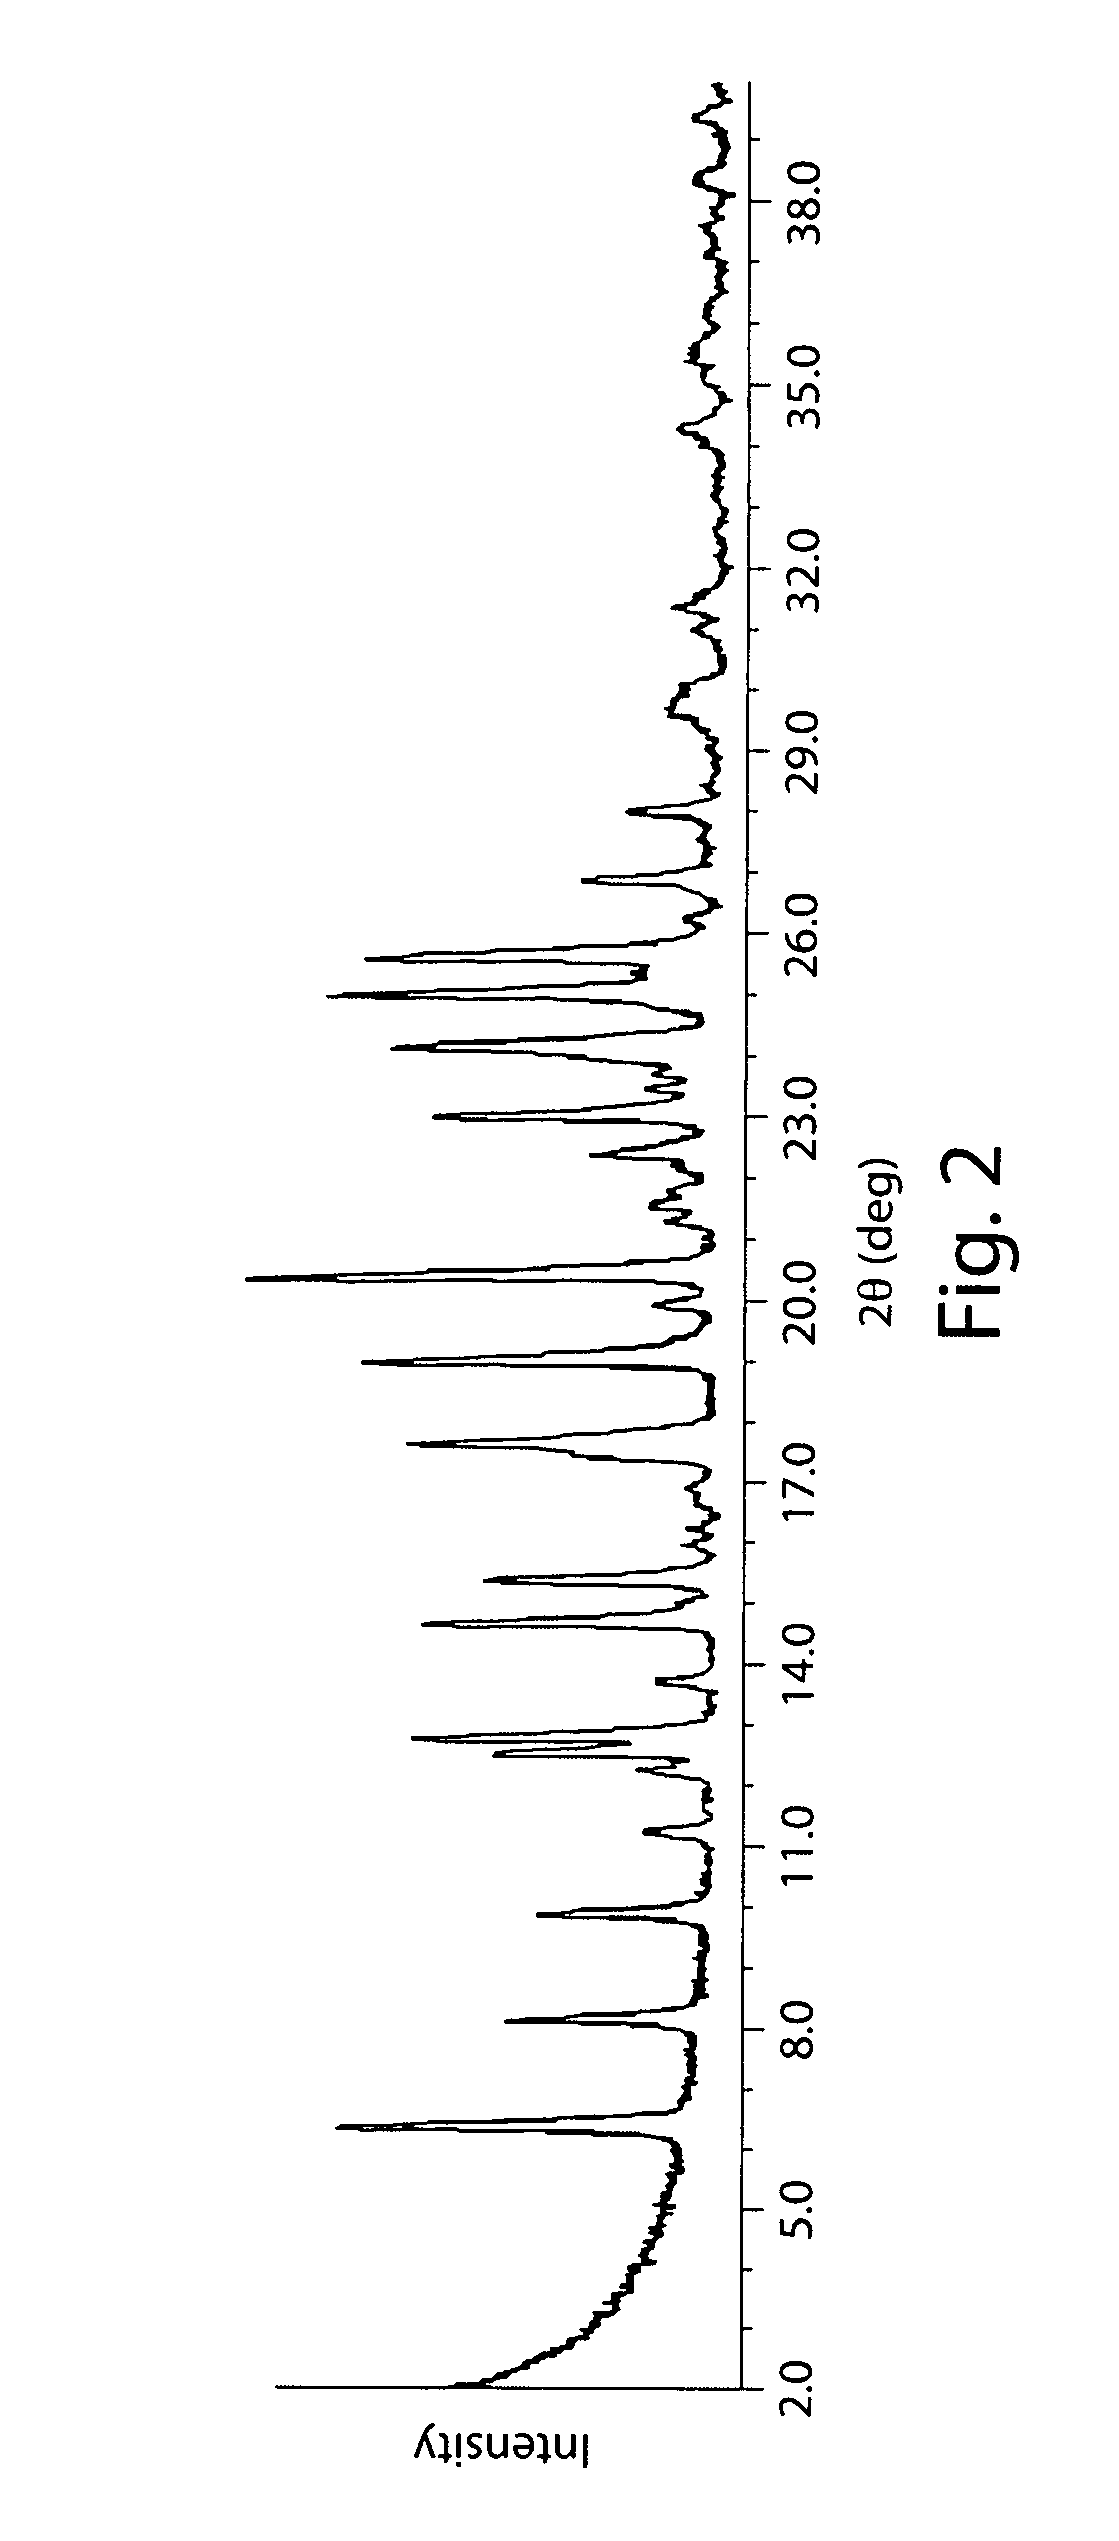 Method for reducing the risk of or preventing infection due to surgical or invasive medical procedures